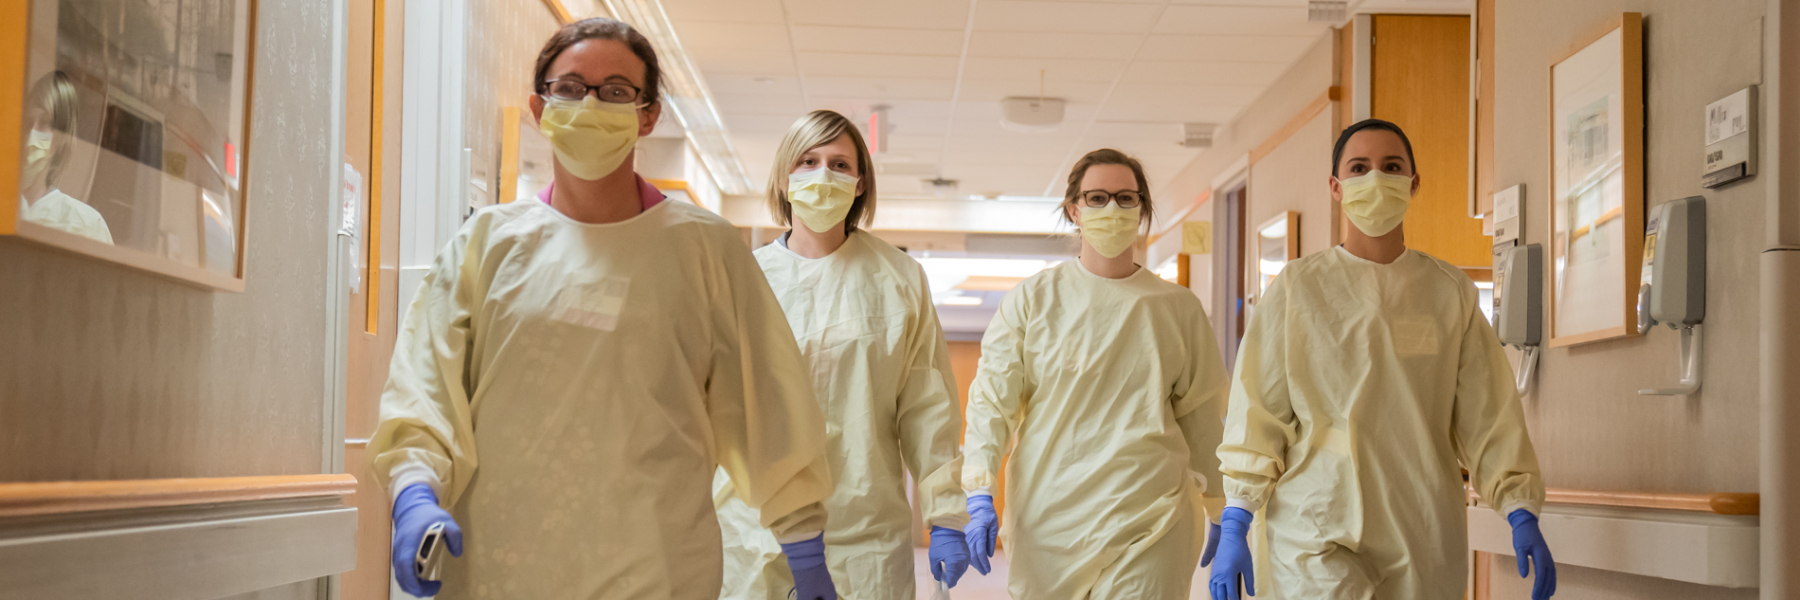 APCC clinicians in gowns and masks at University Hospital